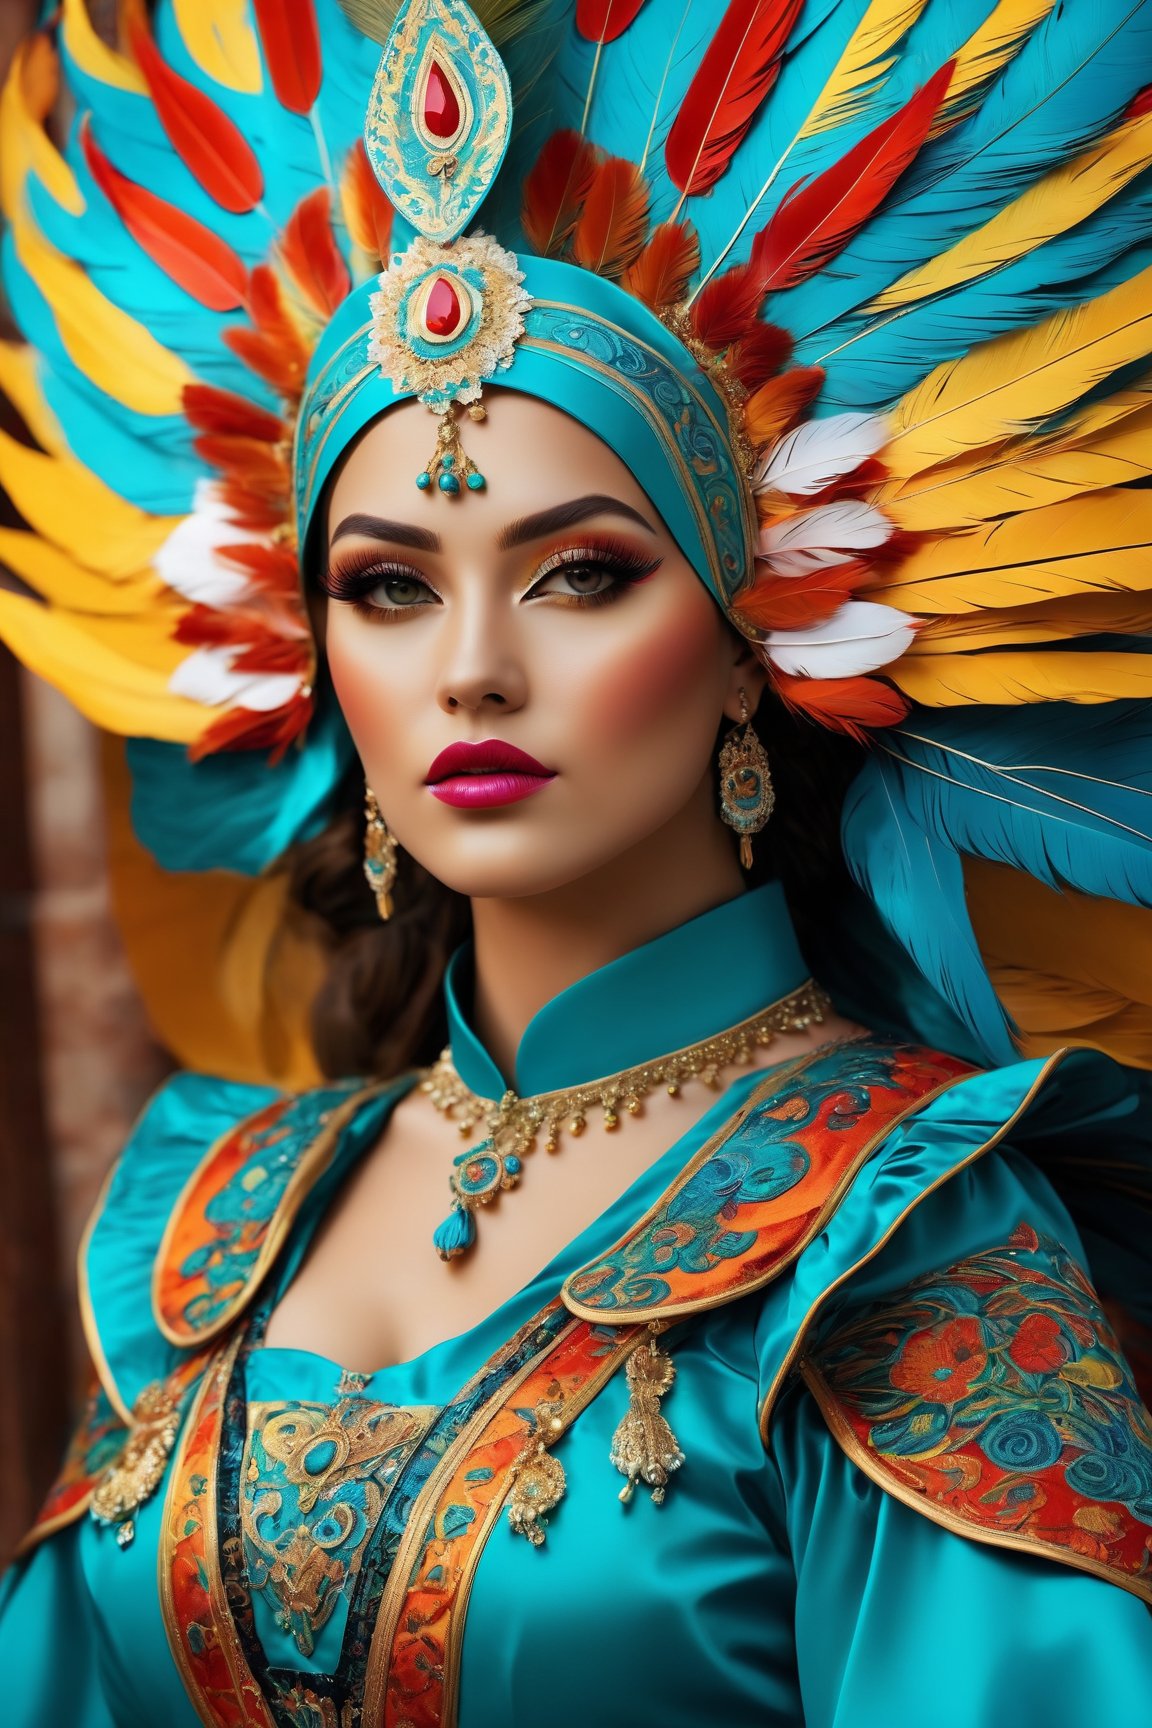 A woman wearing a costume for carnival, with religious images, avoiding the use of feathers. Illustration as the medium, with best quality, 4k resolution, and ultra-detailed. The girl has beautiful detailed eyes and lips, and her face and eyelashes are extremely detailed. She is wearing a vibrant and elaborate costume, adorned with religious symbols and motifs. The costume is made of high-quality materials, resembling a combination of traditional garments and modern designs. It is a masterpiece of craftsmanship, with sharp focus and vivid colors. The overall style is a mix of cultural heritage and contemporary aesthetics. The color palette consists of bright and contrasting hues, emphasizing the festive atmosphere. The lighting captures the richness of the colors and highlights the intricate details of the costume.